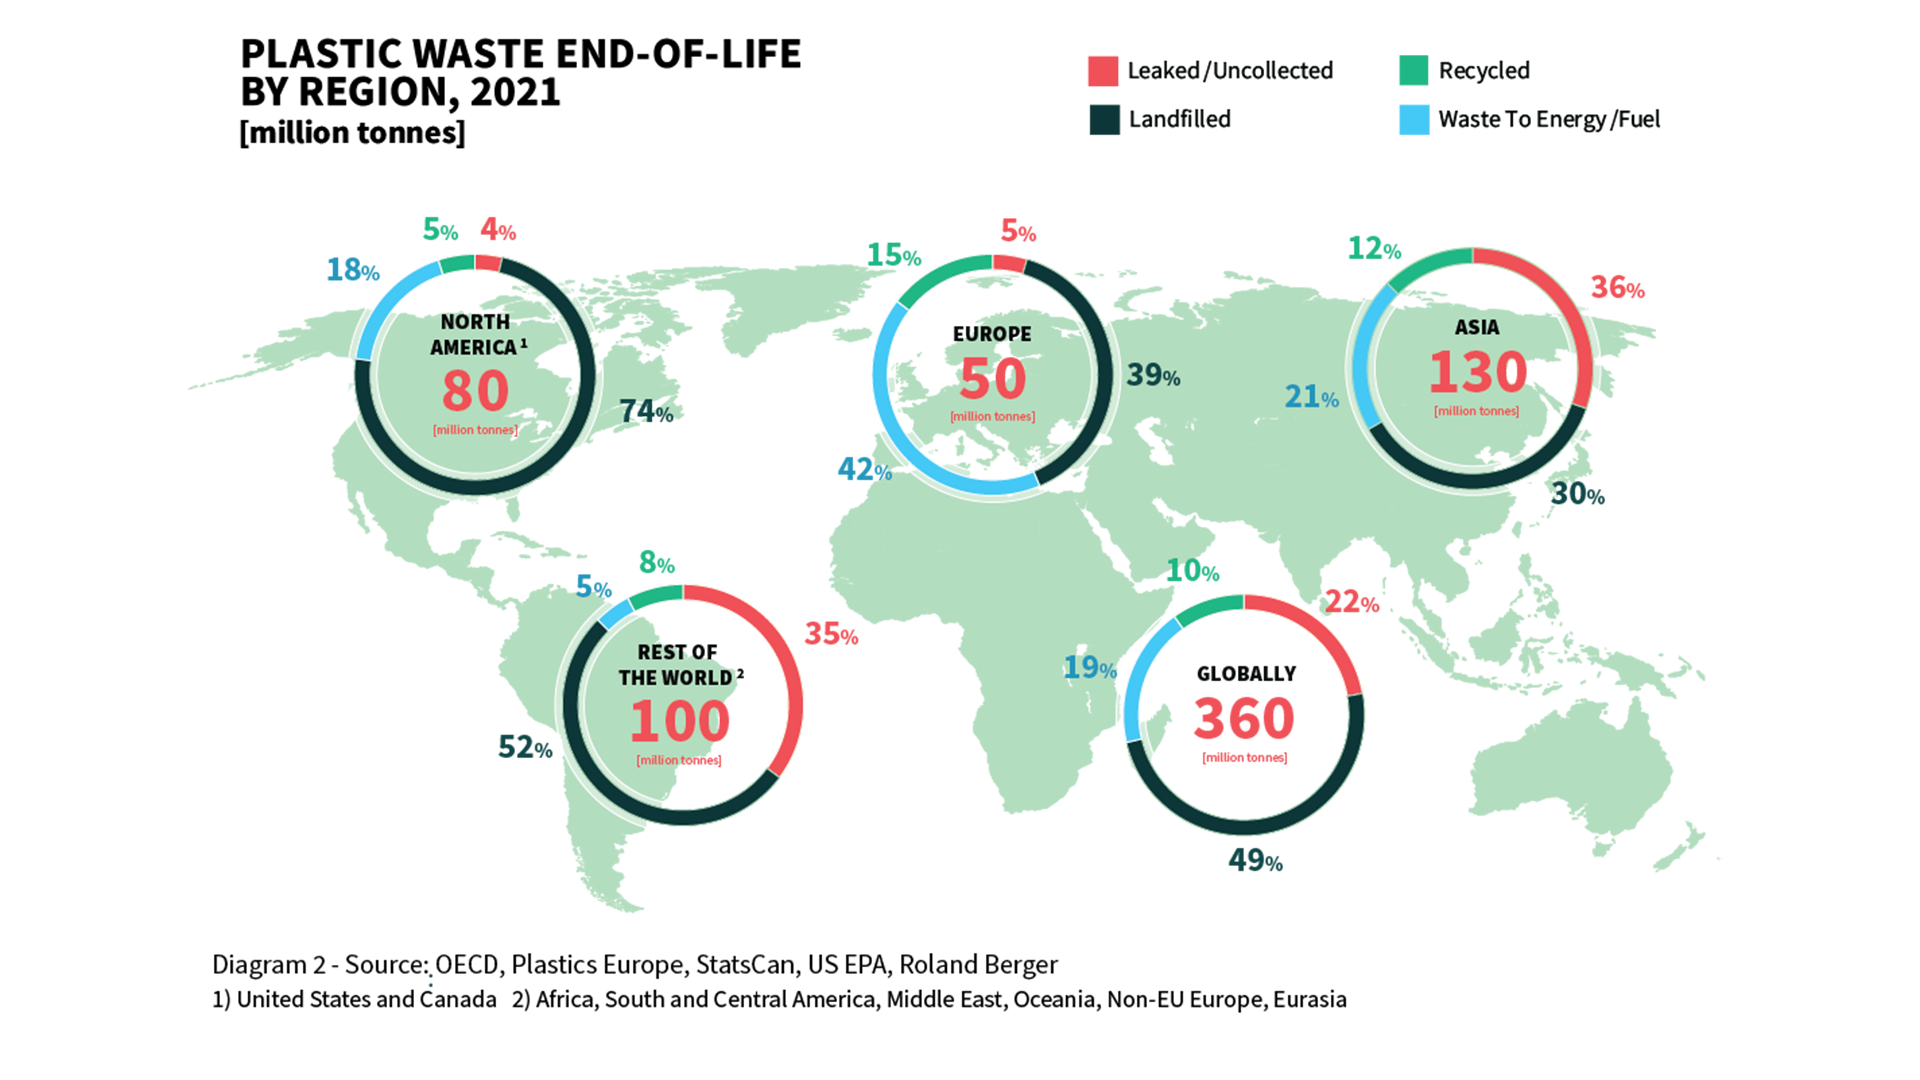 Global overview of plastic waste management by region